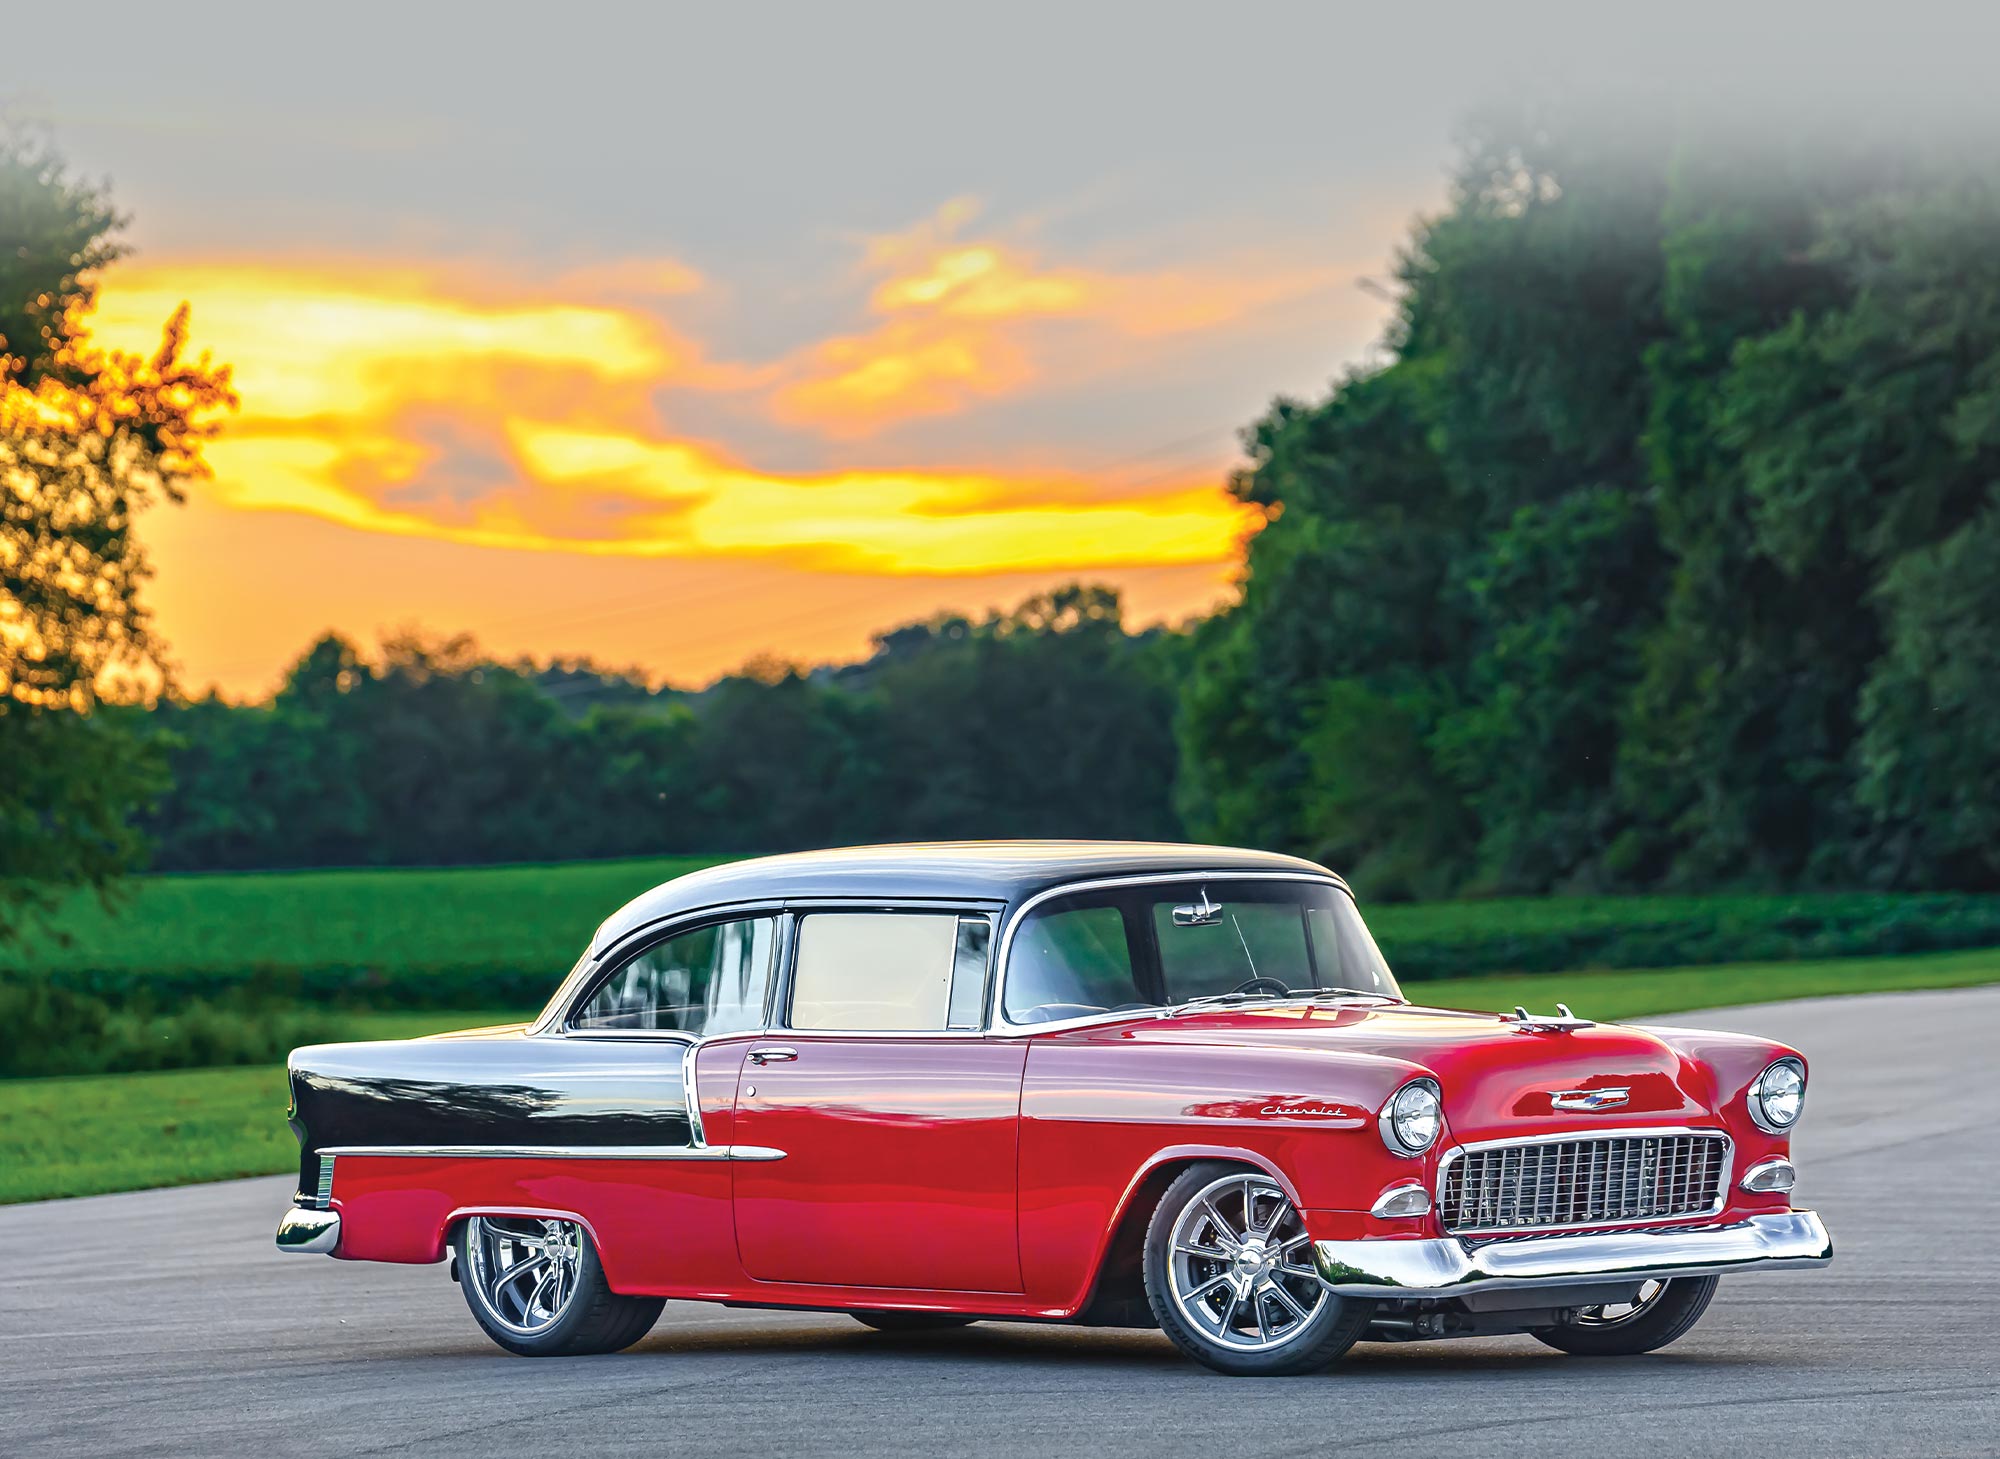 three quarter passenger side view of Darrin Gartrell's black and red '55 Chevy 210 parked against a bright sunset behind deep green trees